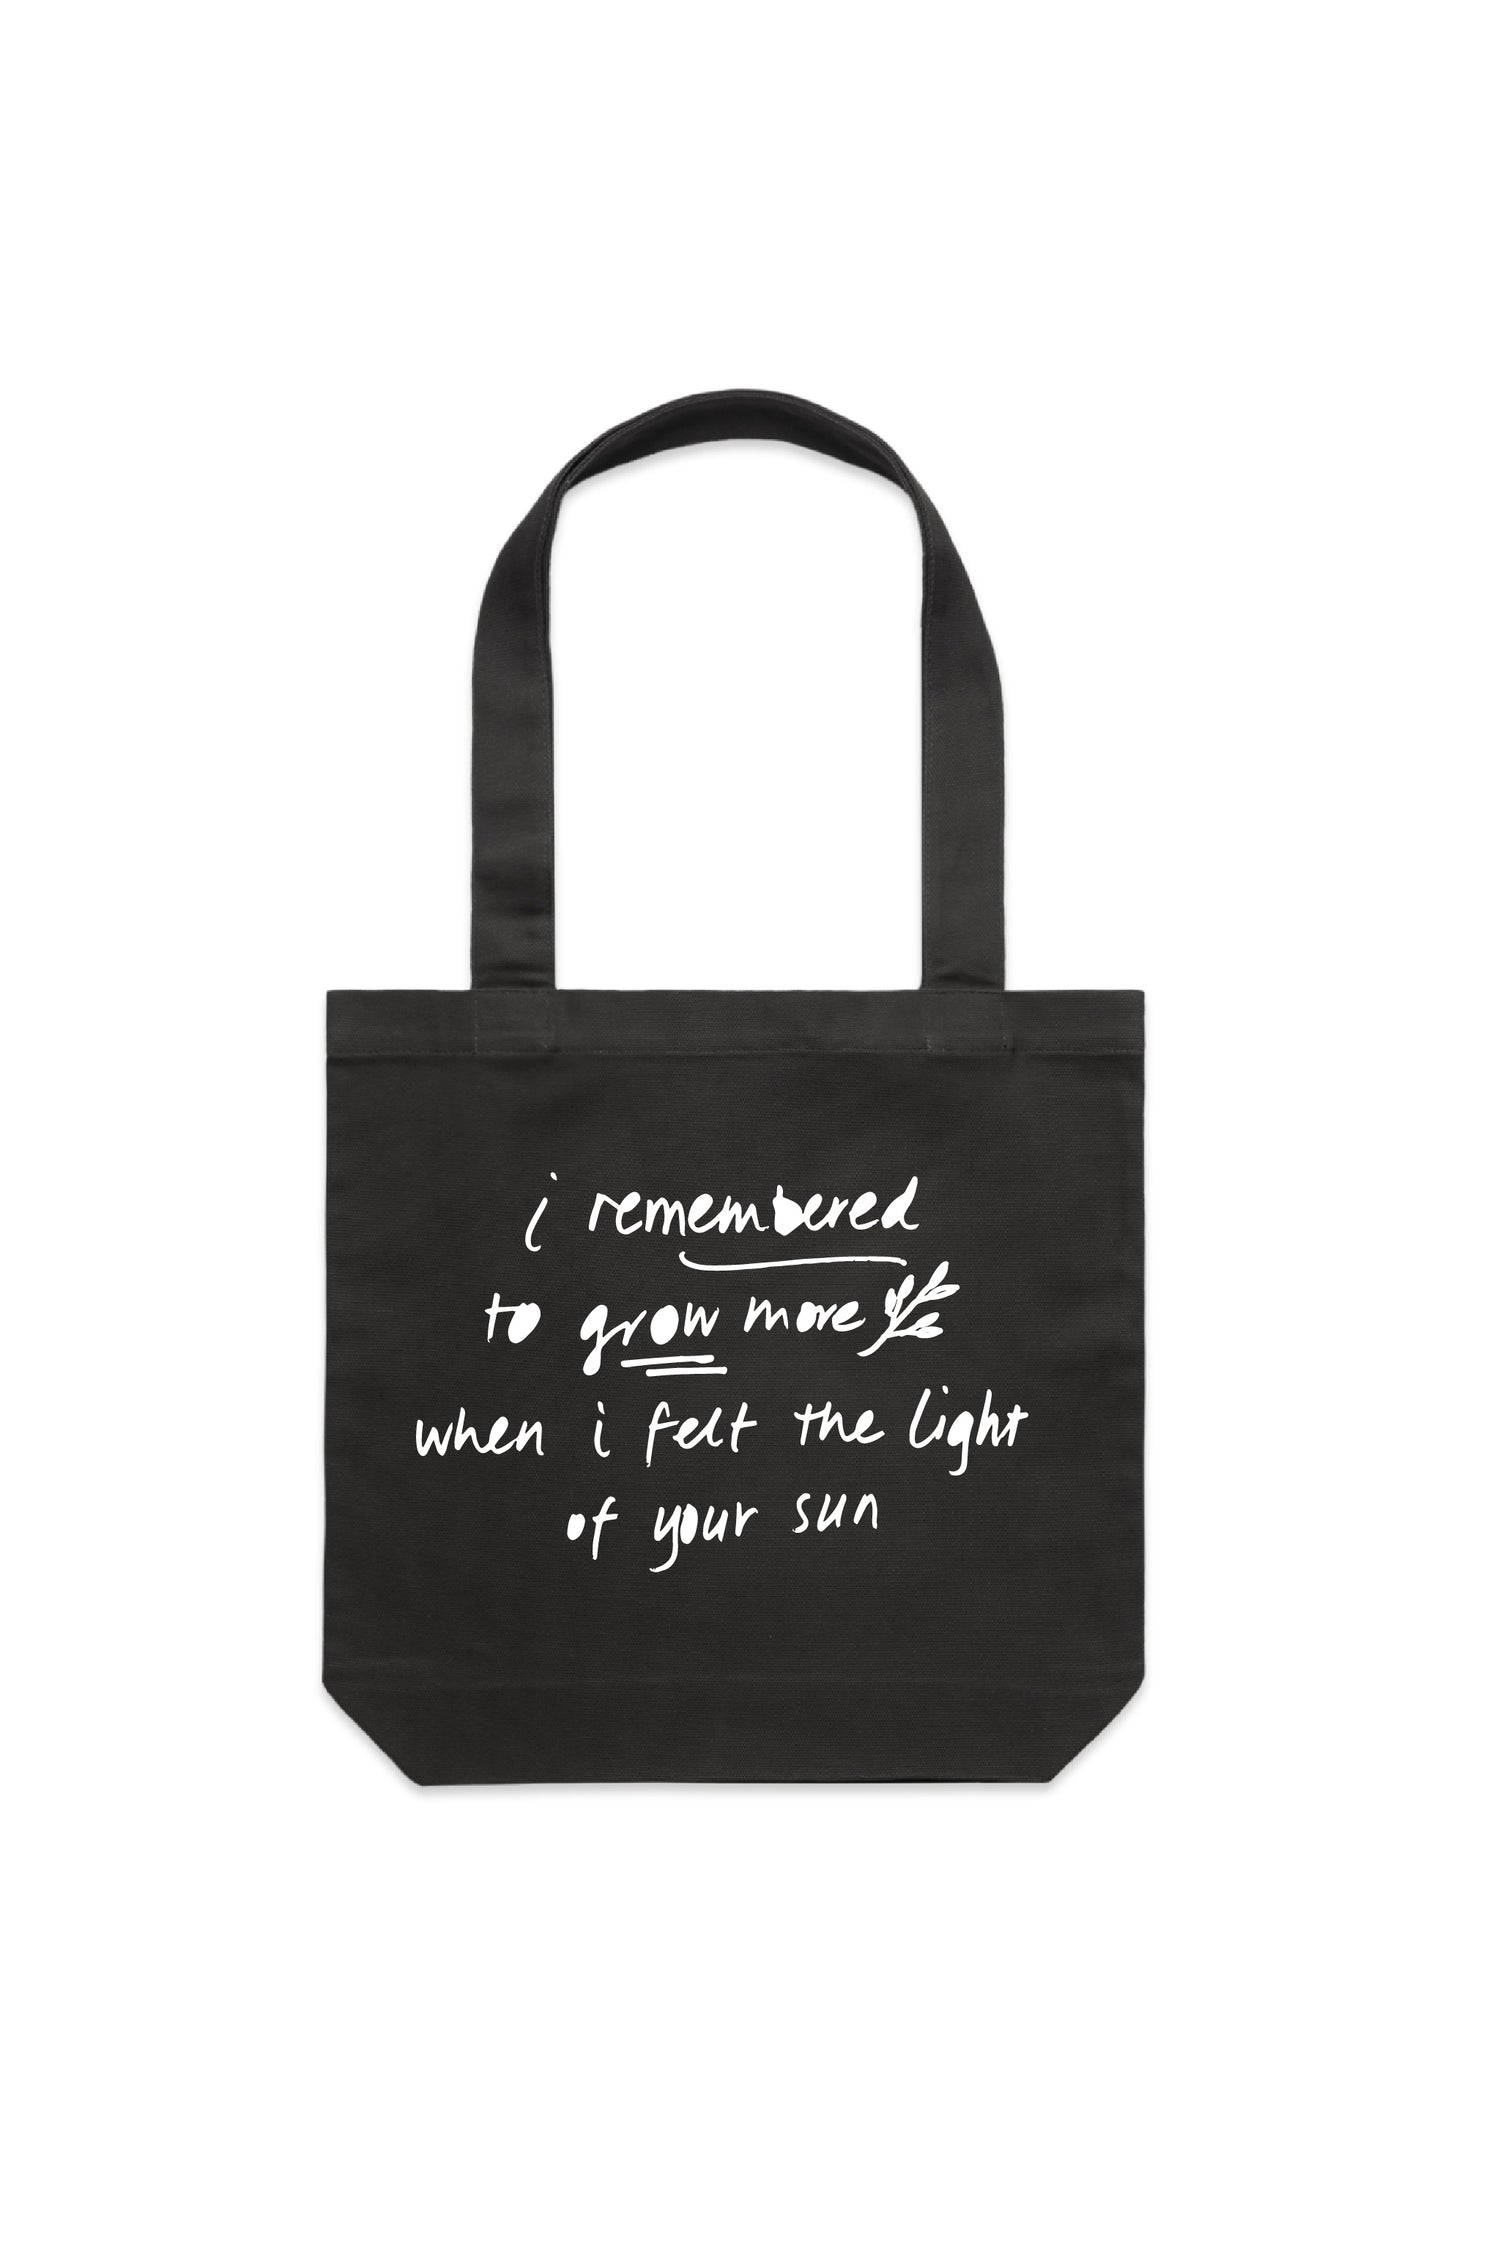 Kav Temperley Family Domestic Violence social enterprise charity Charcoal Tote Bag with the words 'I remembered to grow more when I felt the light of your sun' in white.